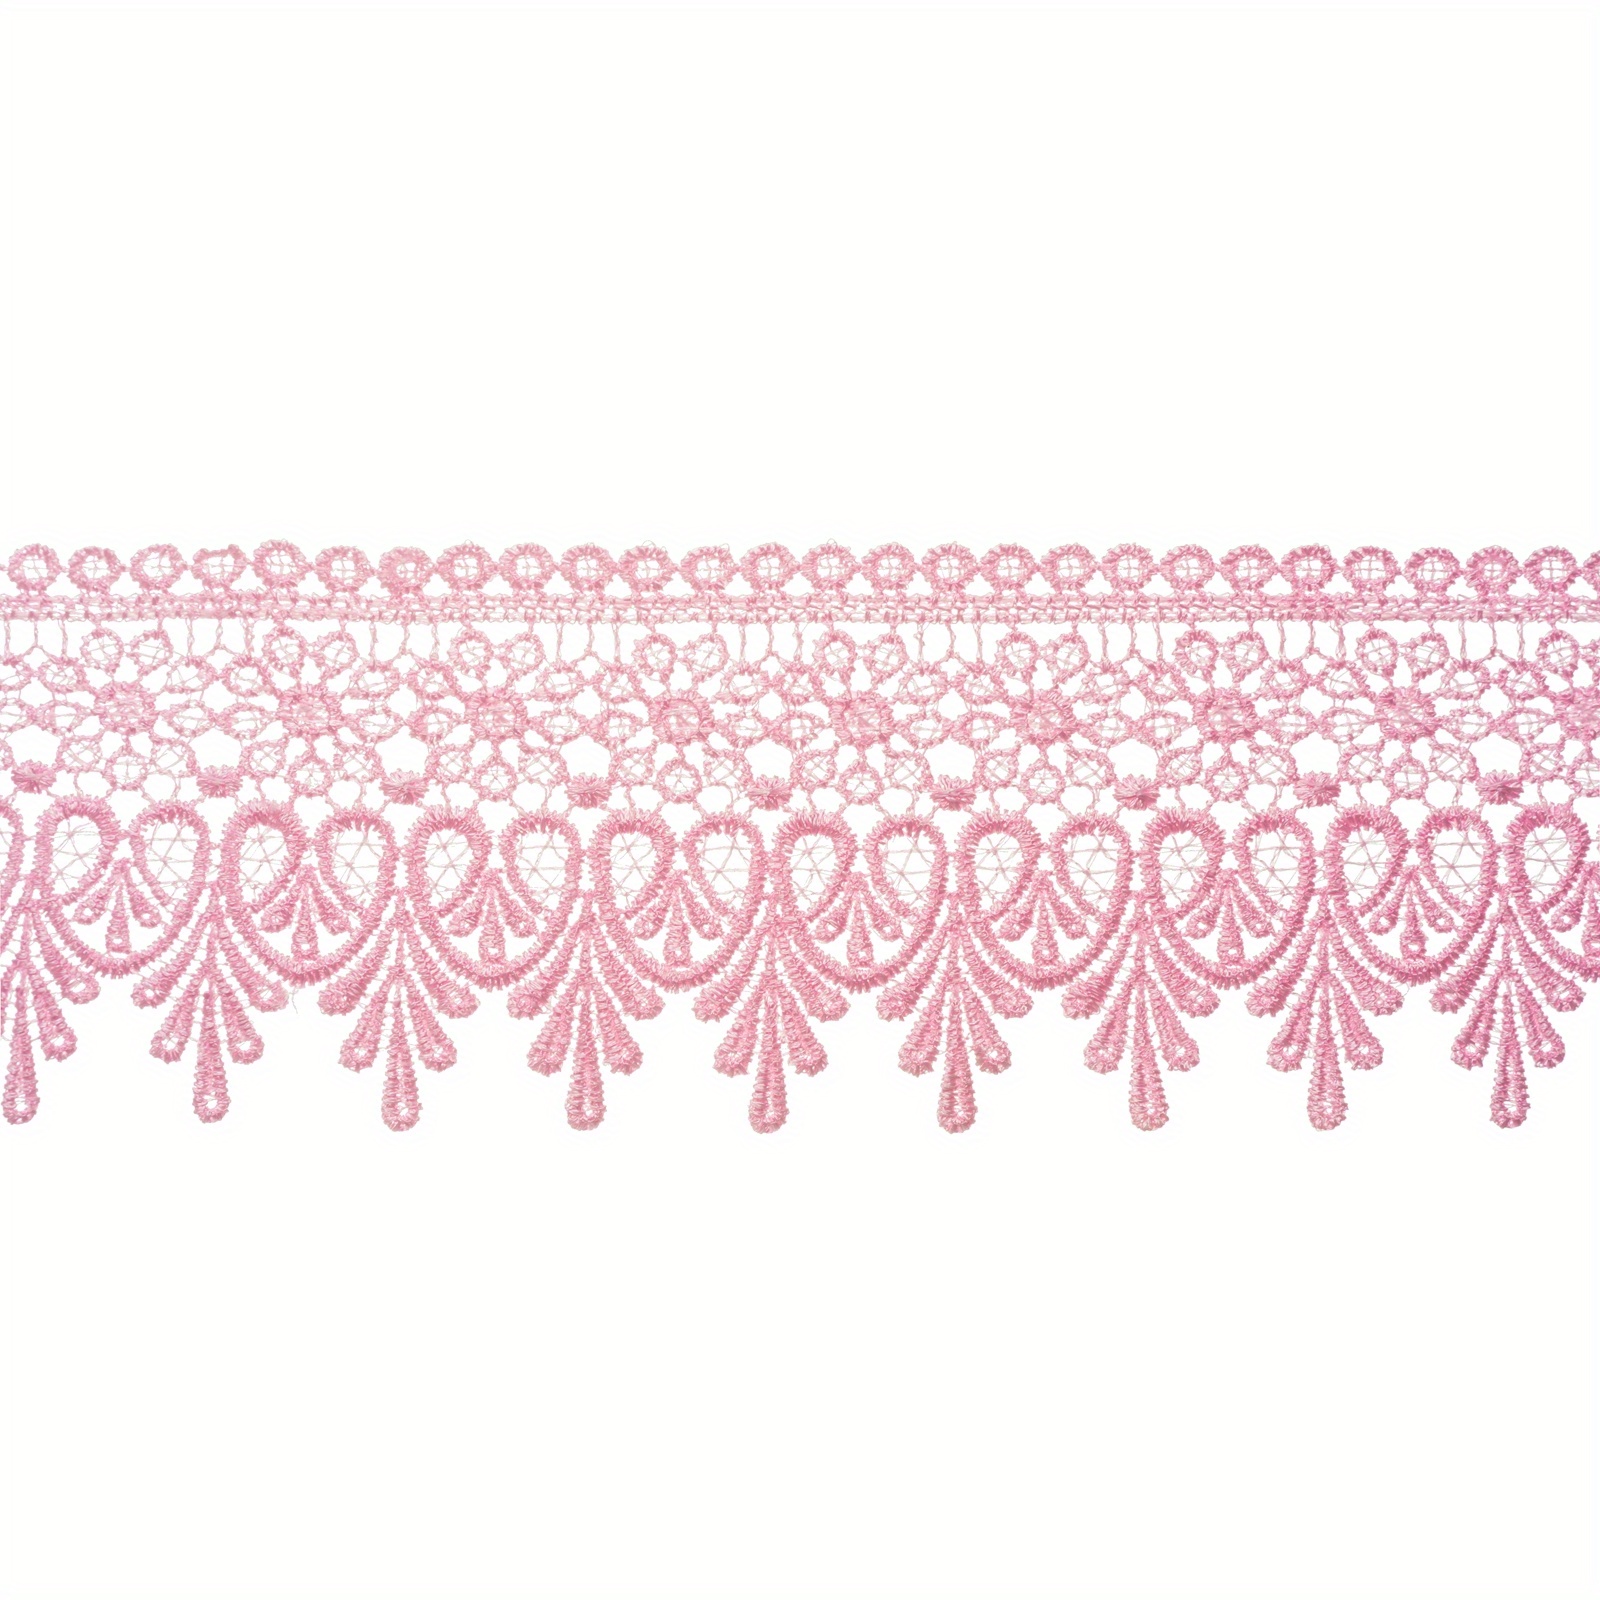 Wide pink Lace Ribbon Trim With Big Flower Stock Vector